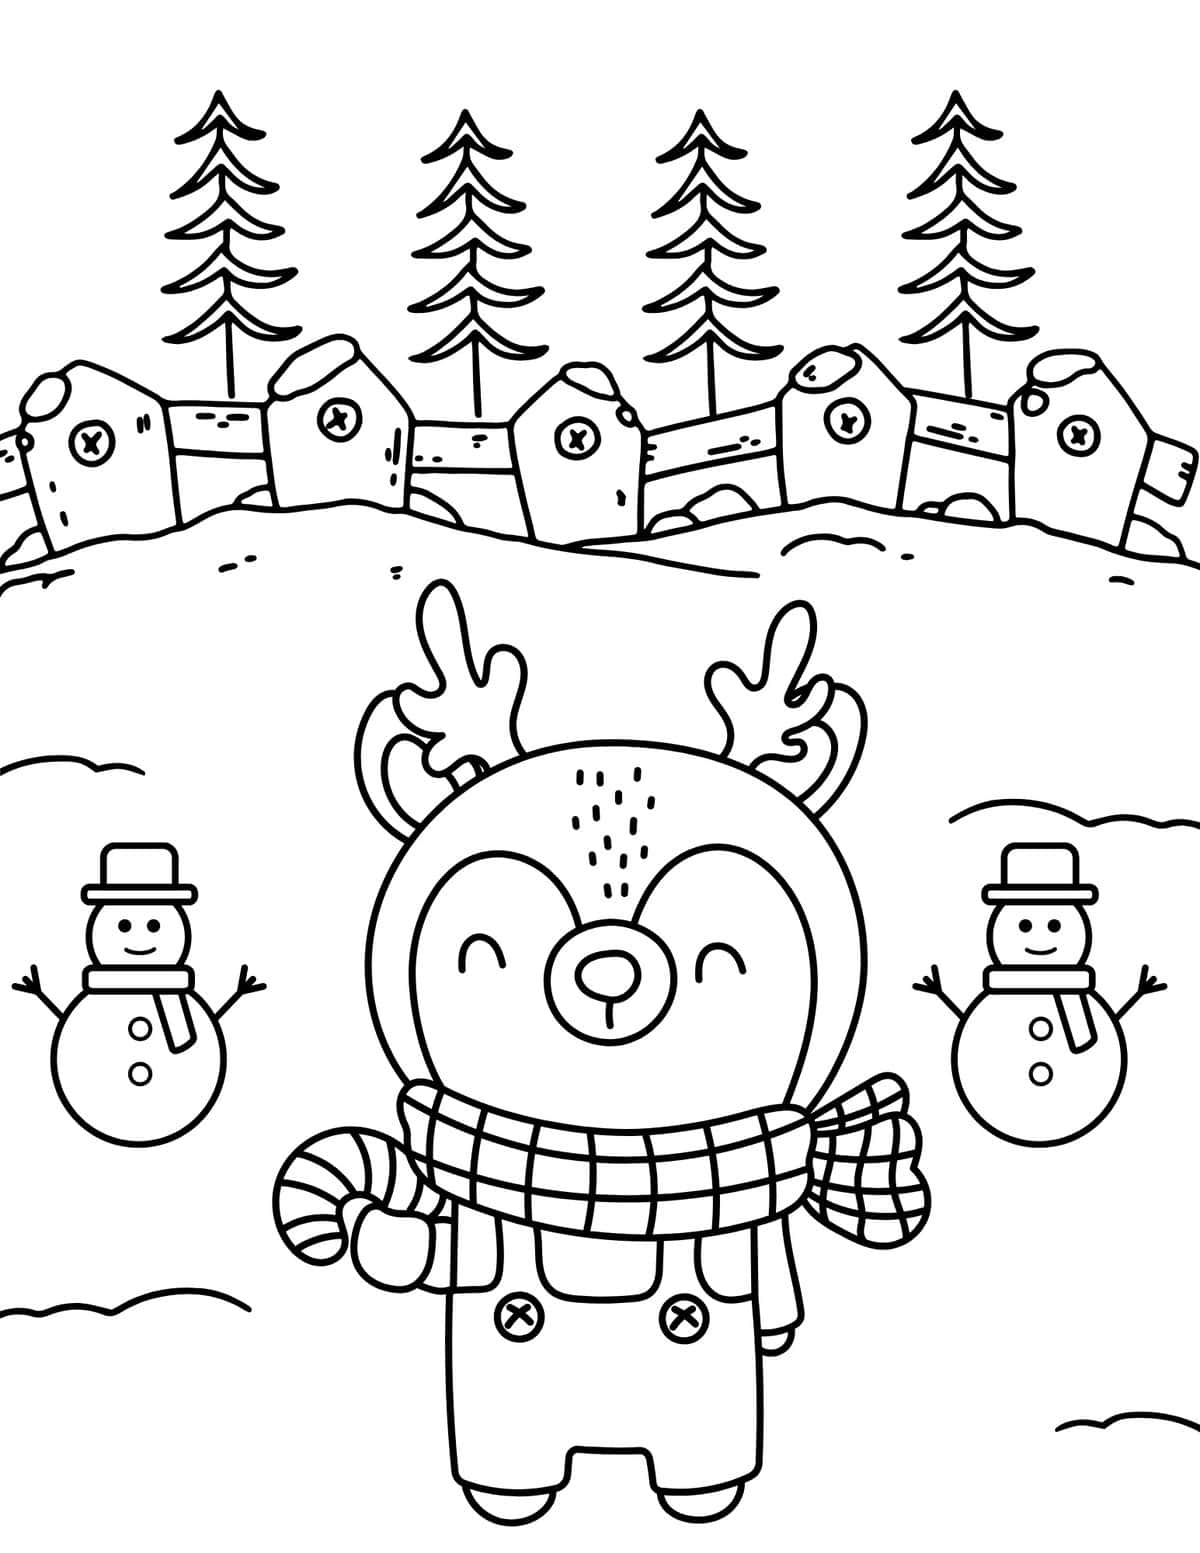 reindeer and snowmen christmas coloring pages